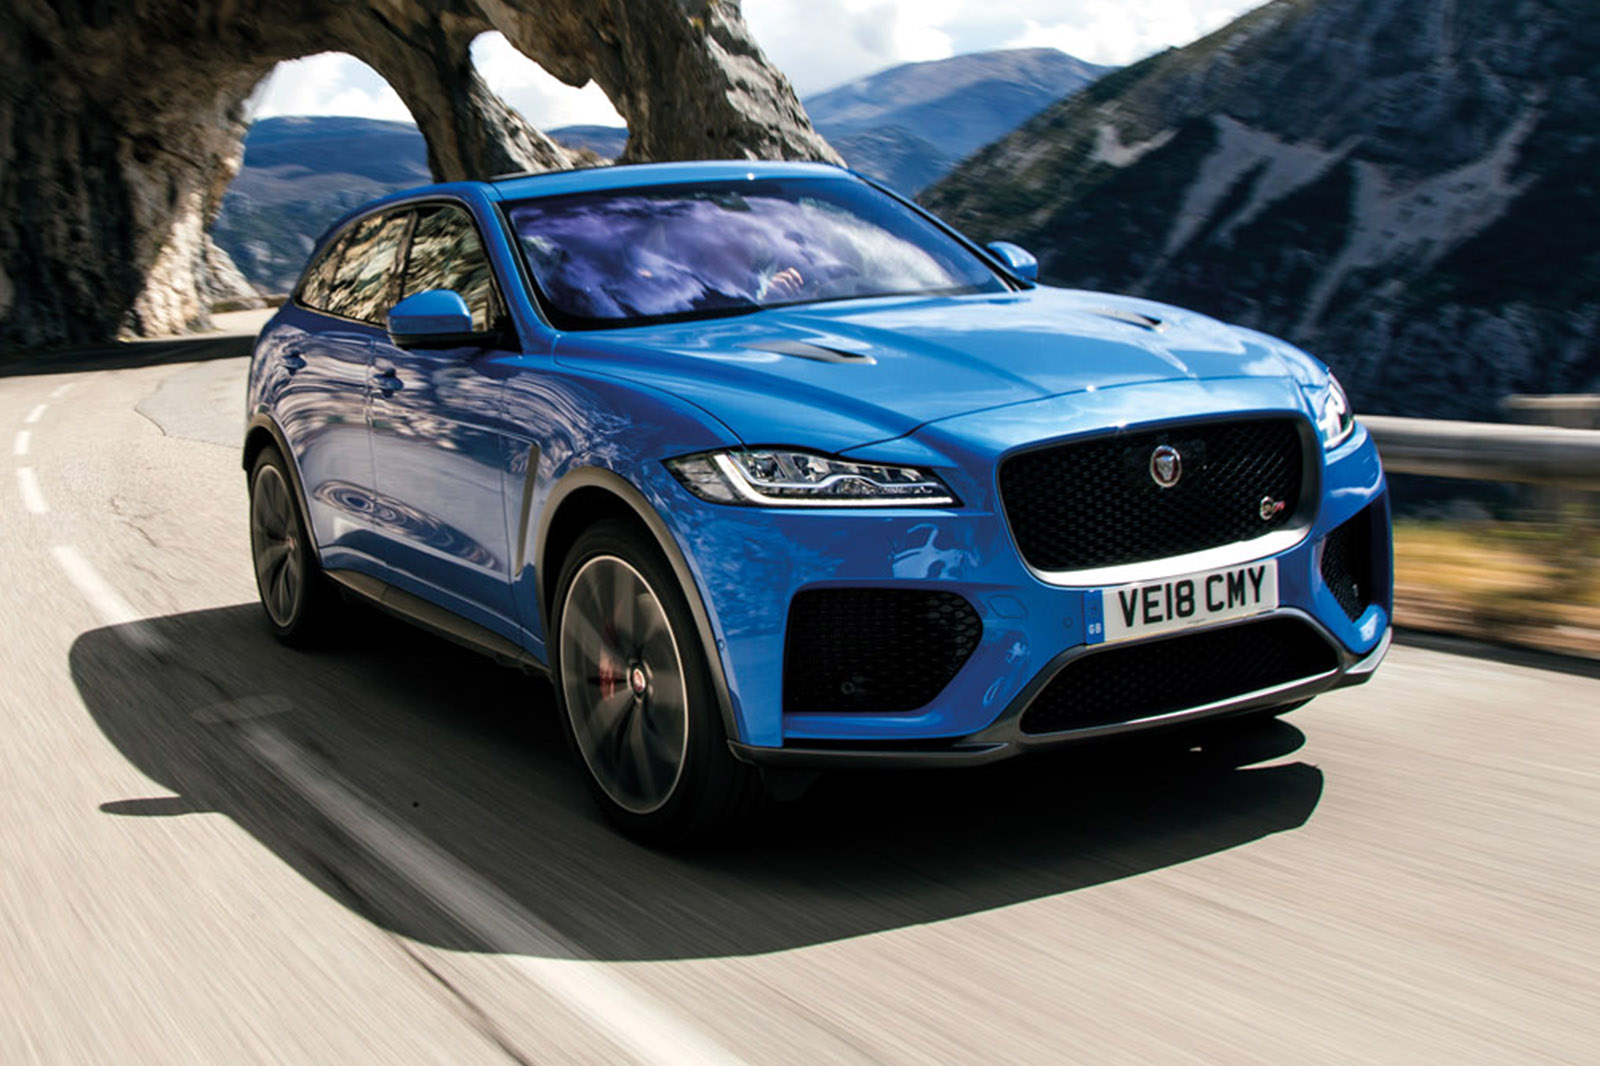 Nearly new buying guide Jaguar FPace Autocar